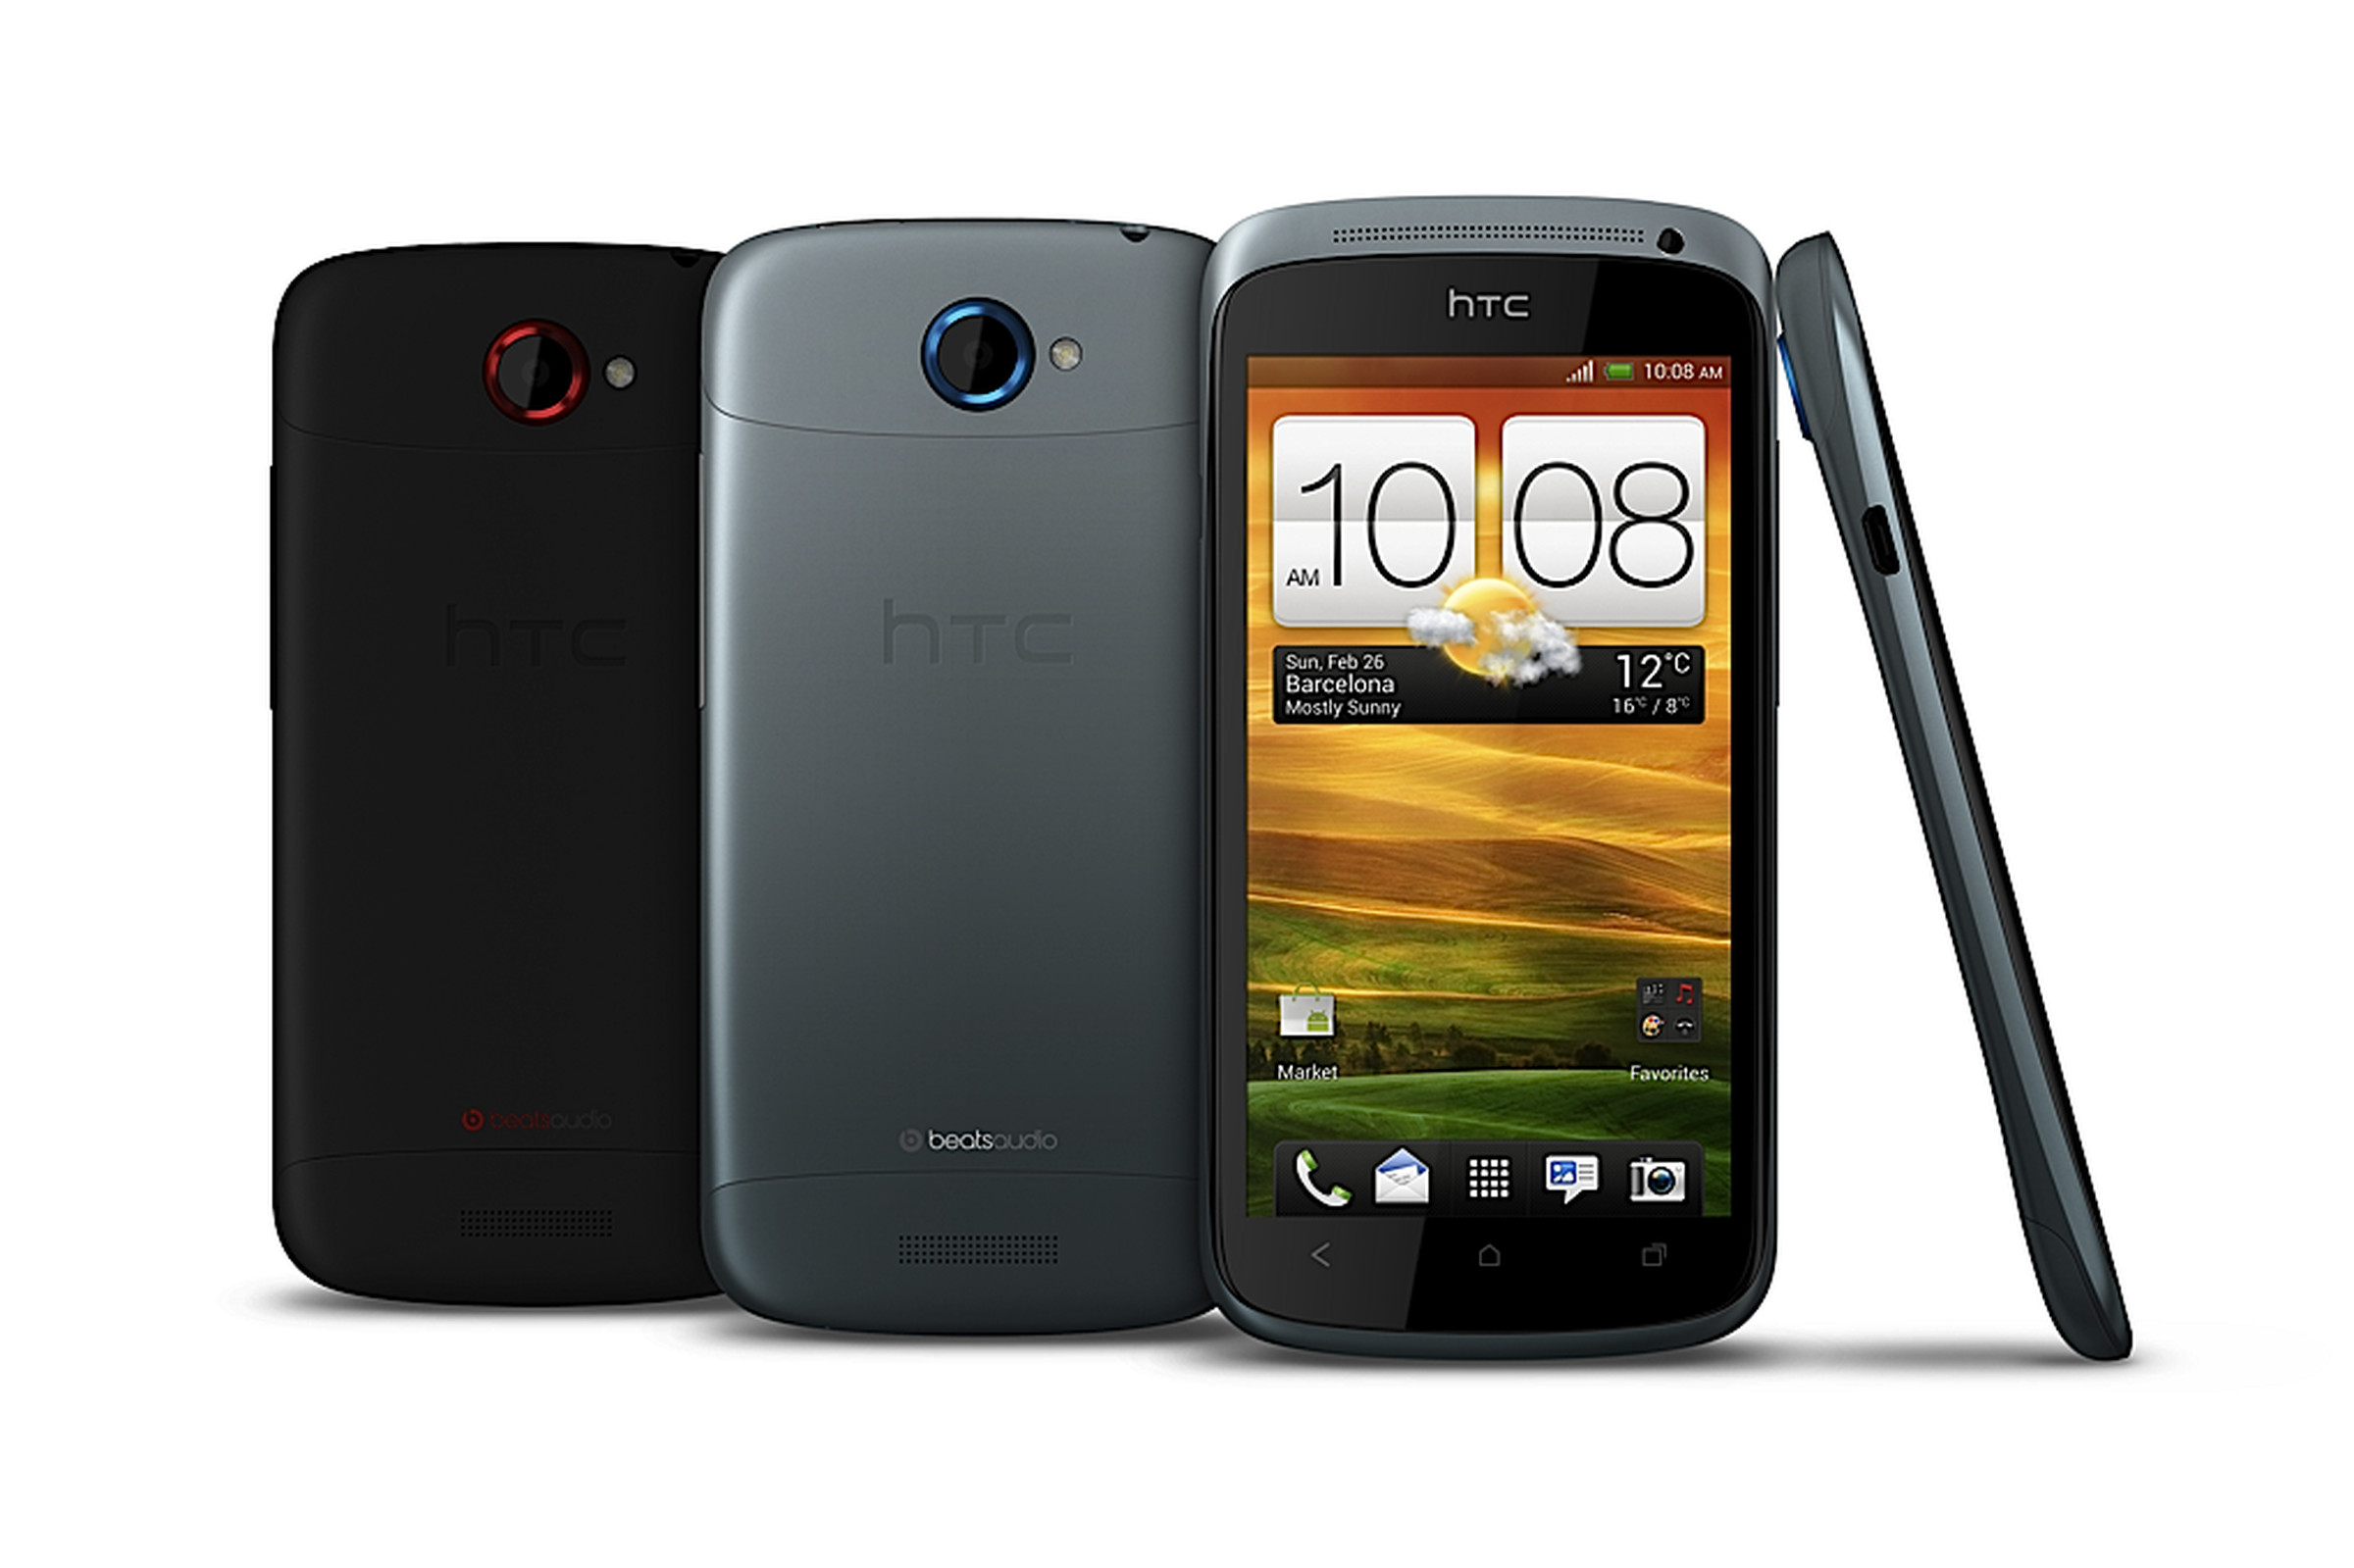 HTC One S announcement photos